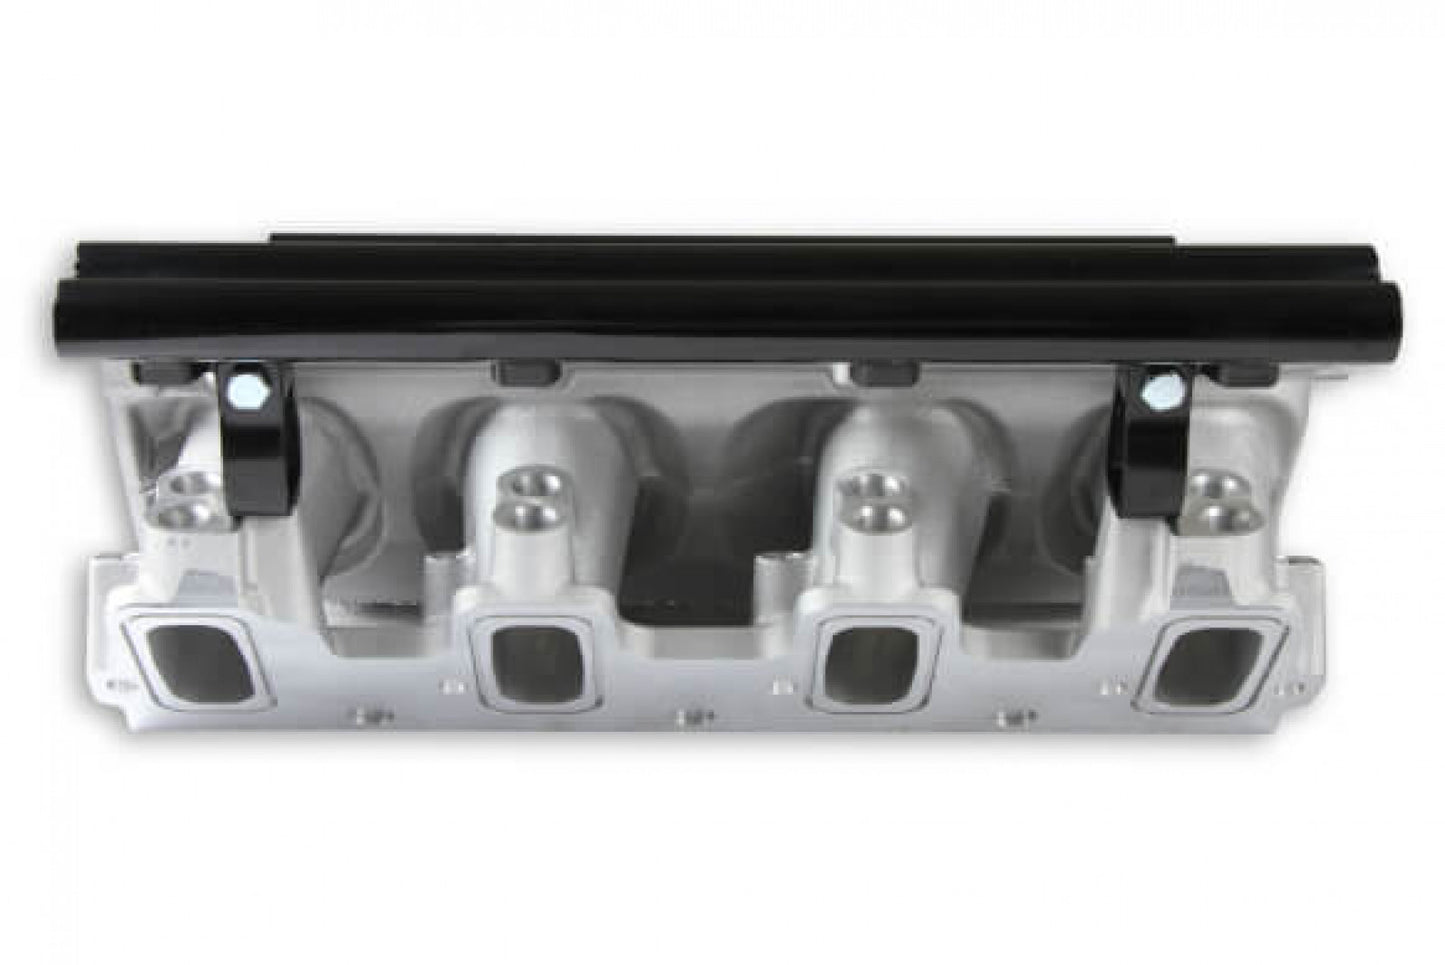 Holley EFI Holley Ultra Lo-Ram Manifold Base and Fuel Rails Dual Fuel Injector GM LS3/L92 300-673